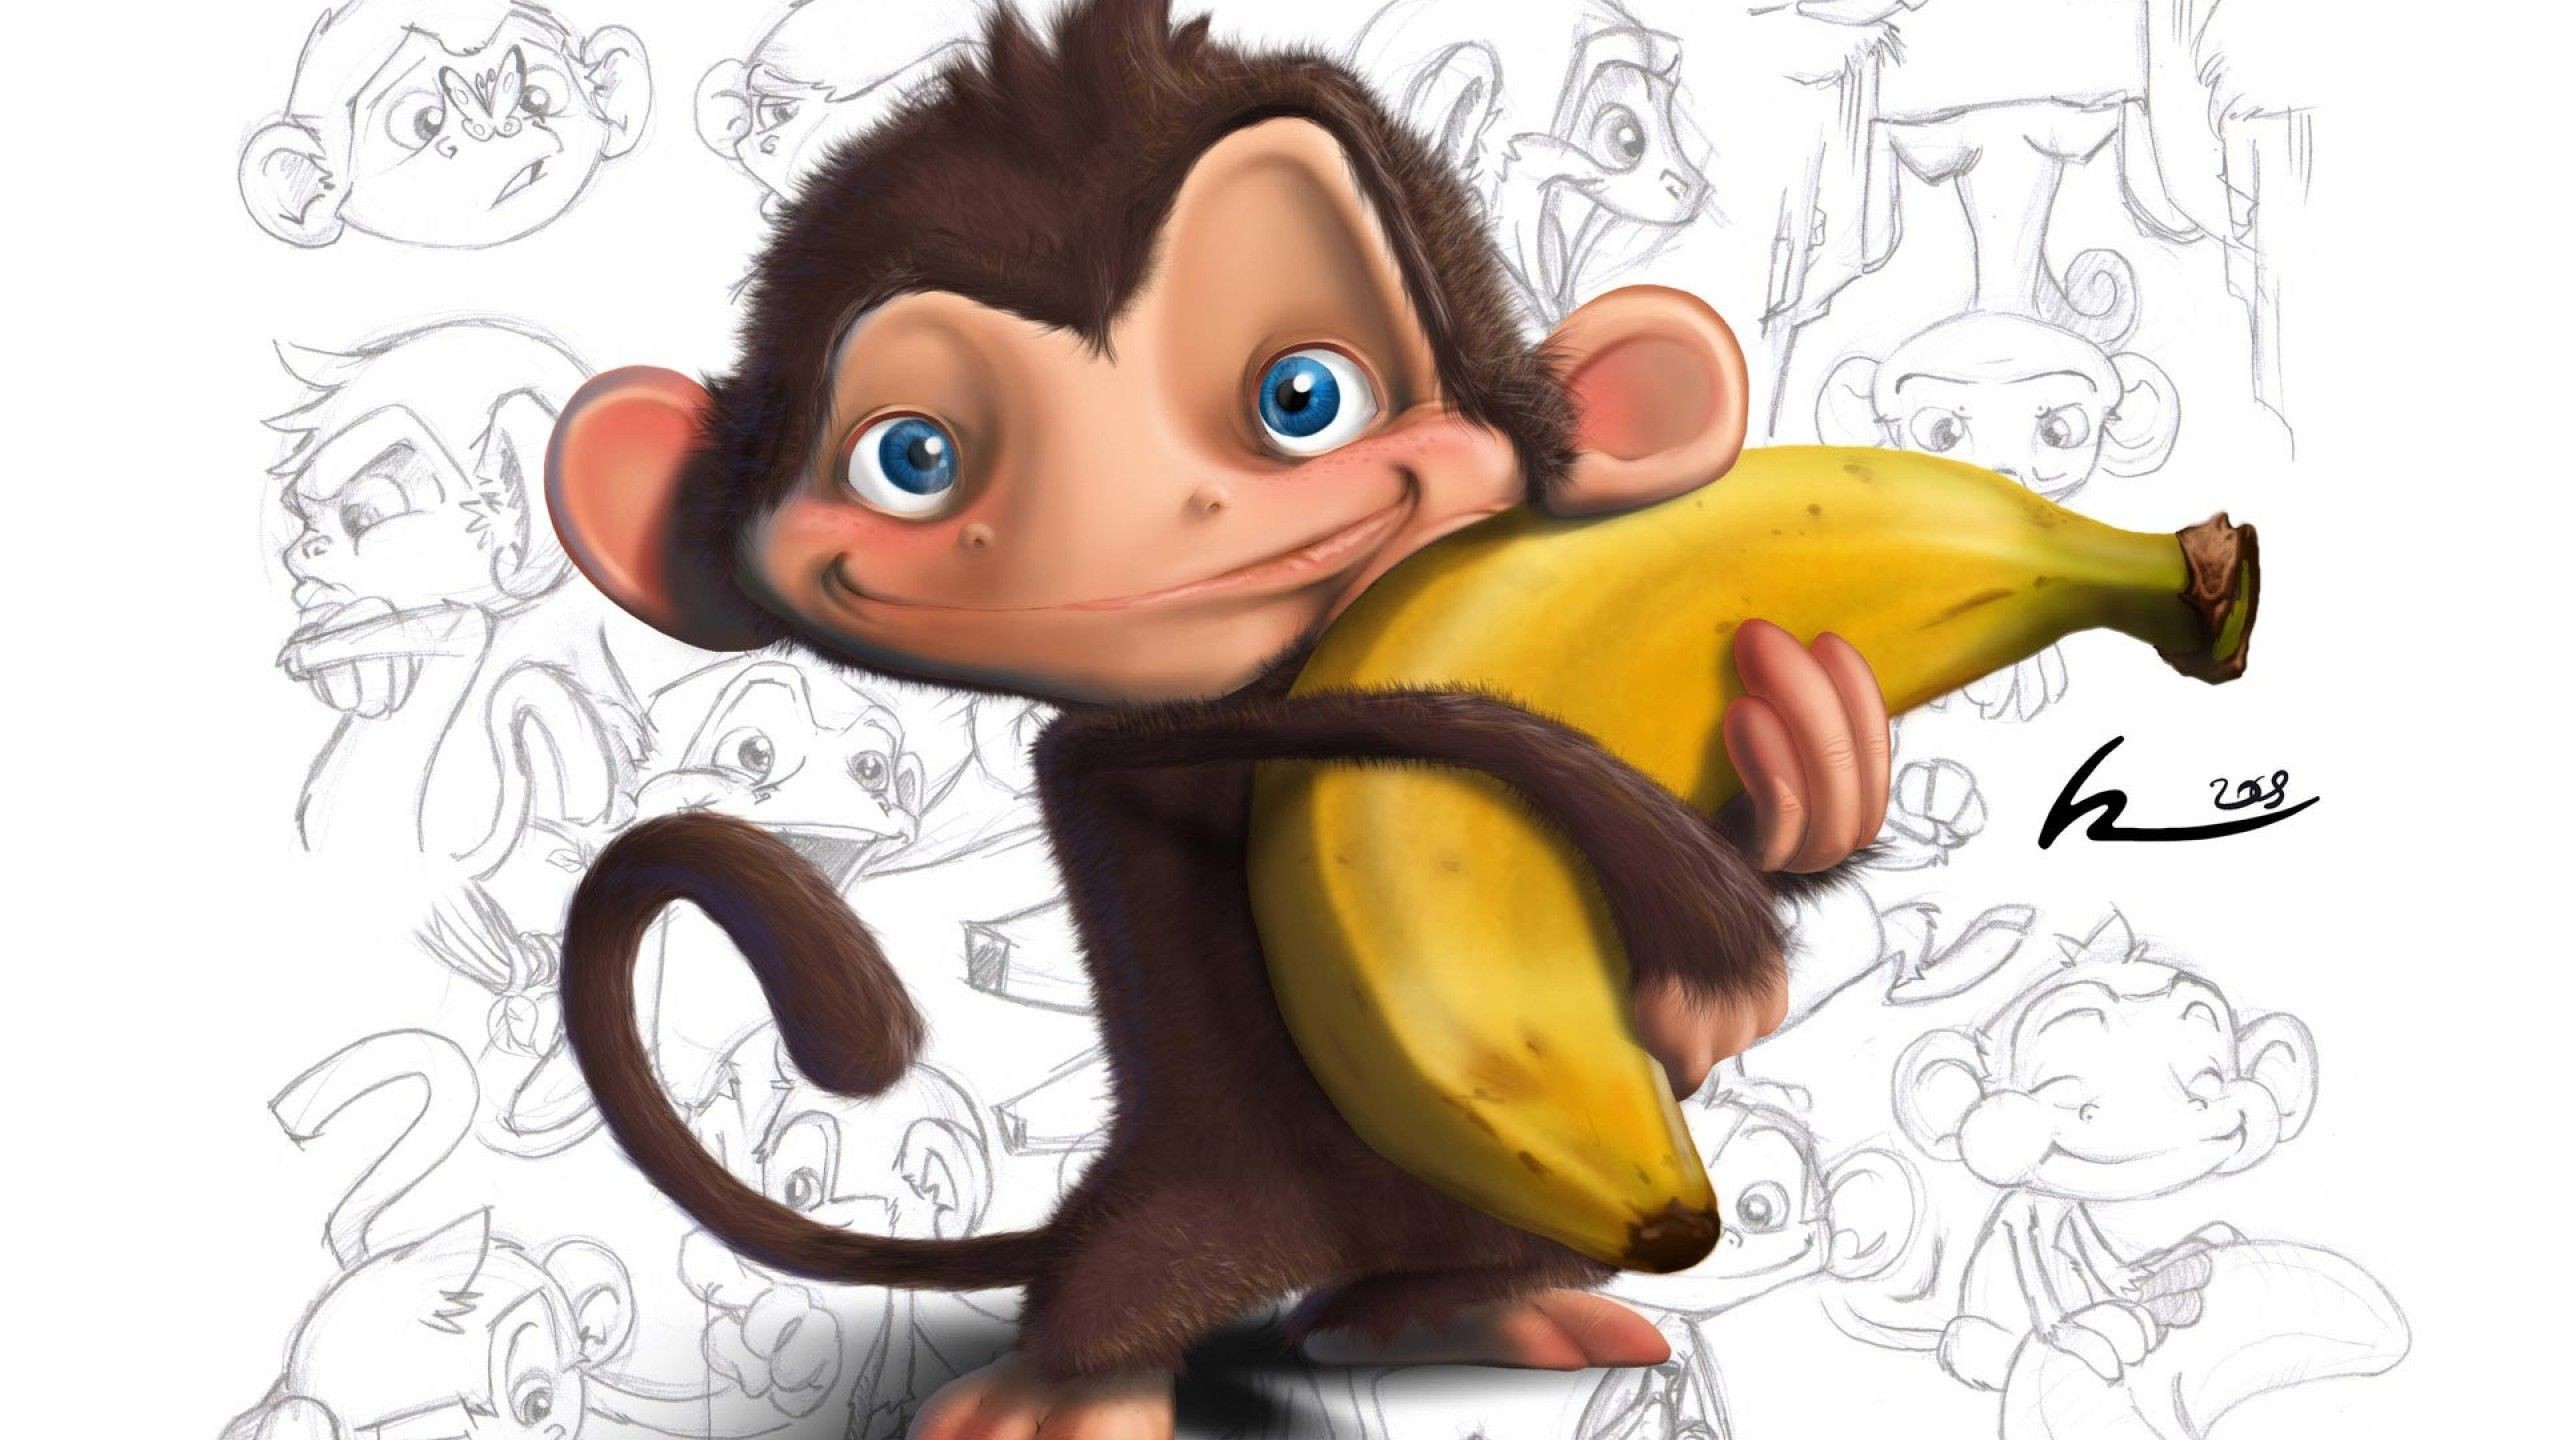 2560x1440 Other: Banana Love Monkey Funny Cartoon Cute Pets Free Wallpapers .